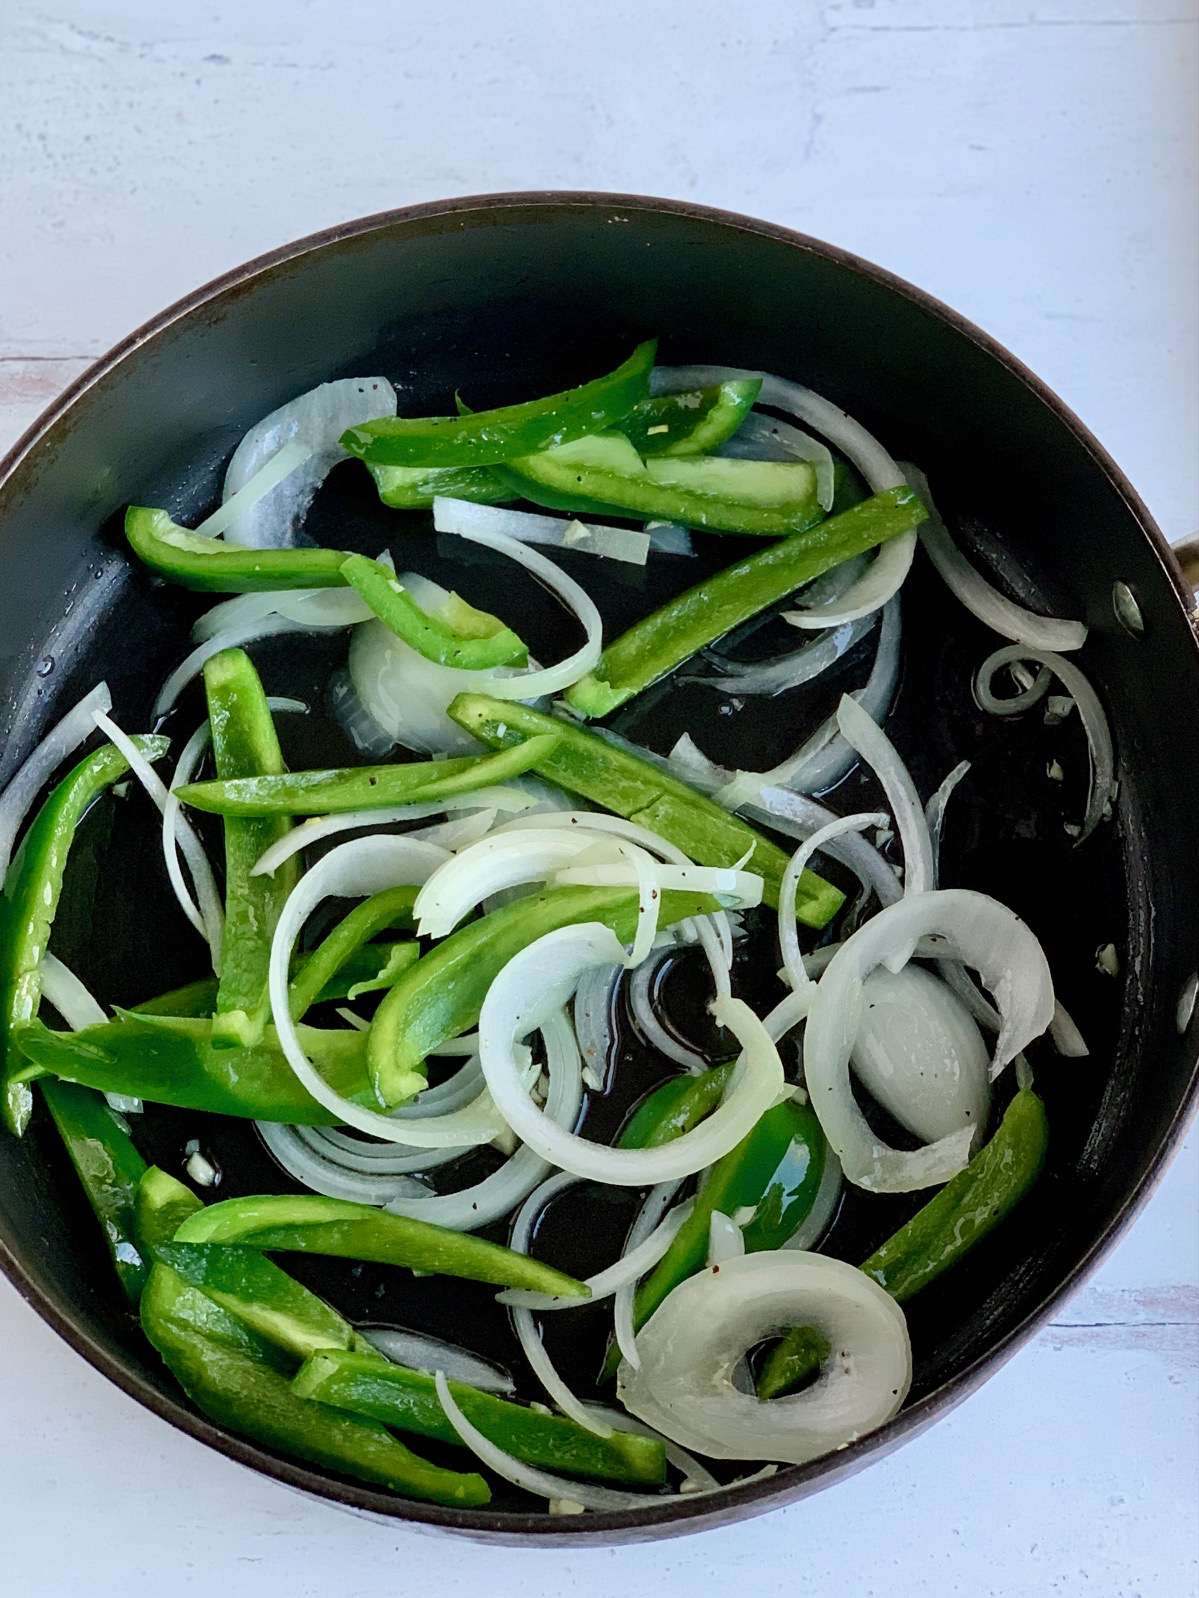 SautÃ©ing sliced onions, garlic, and green bell peppers in a skillet